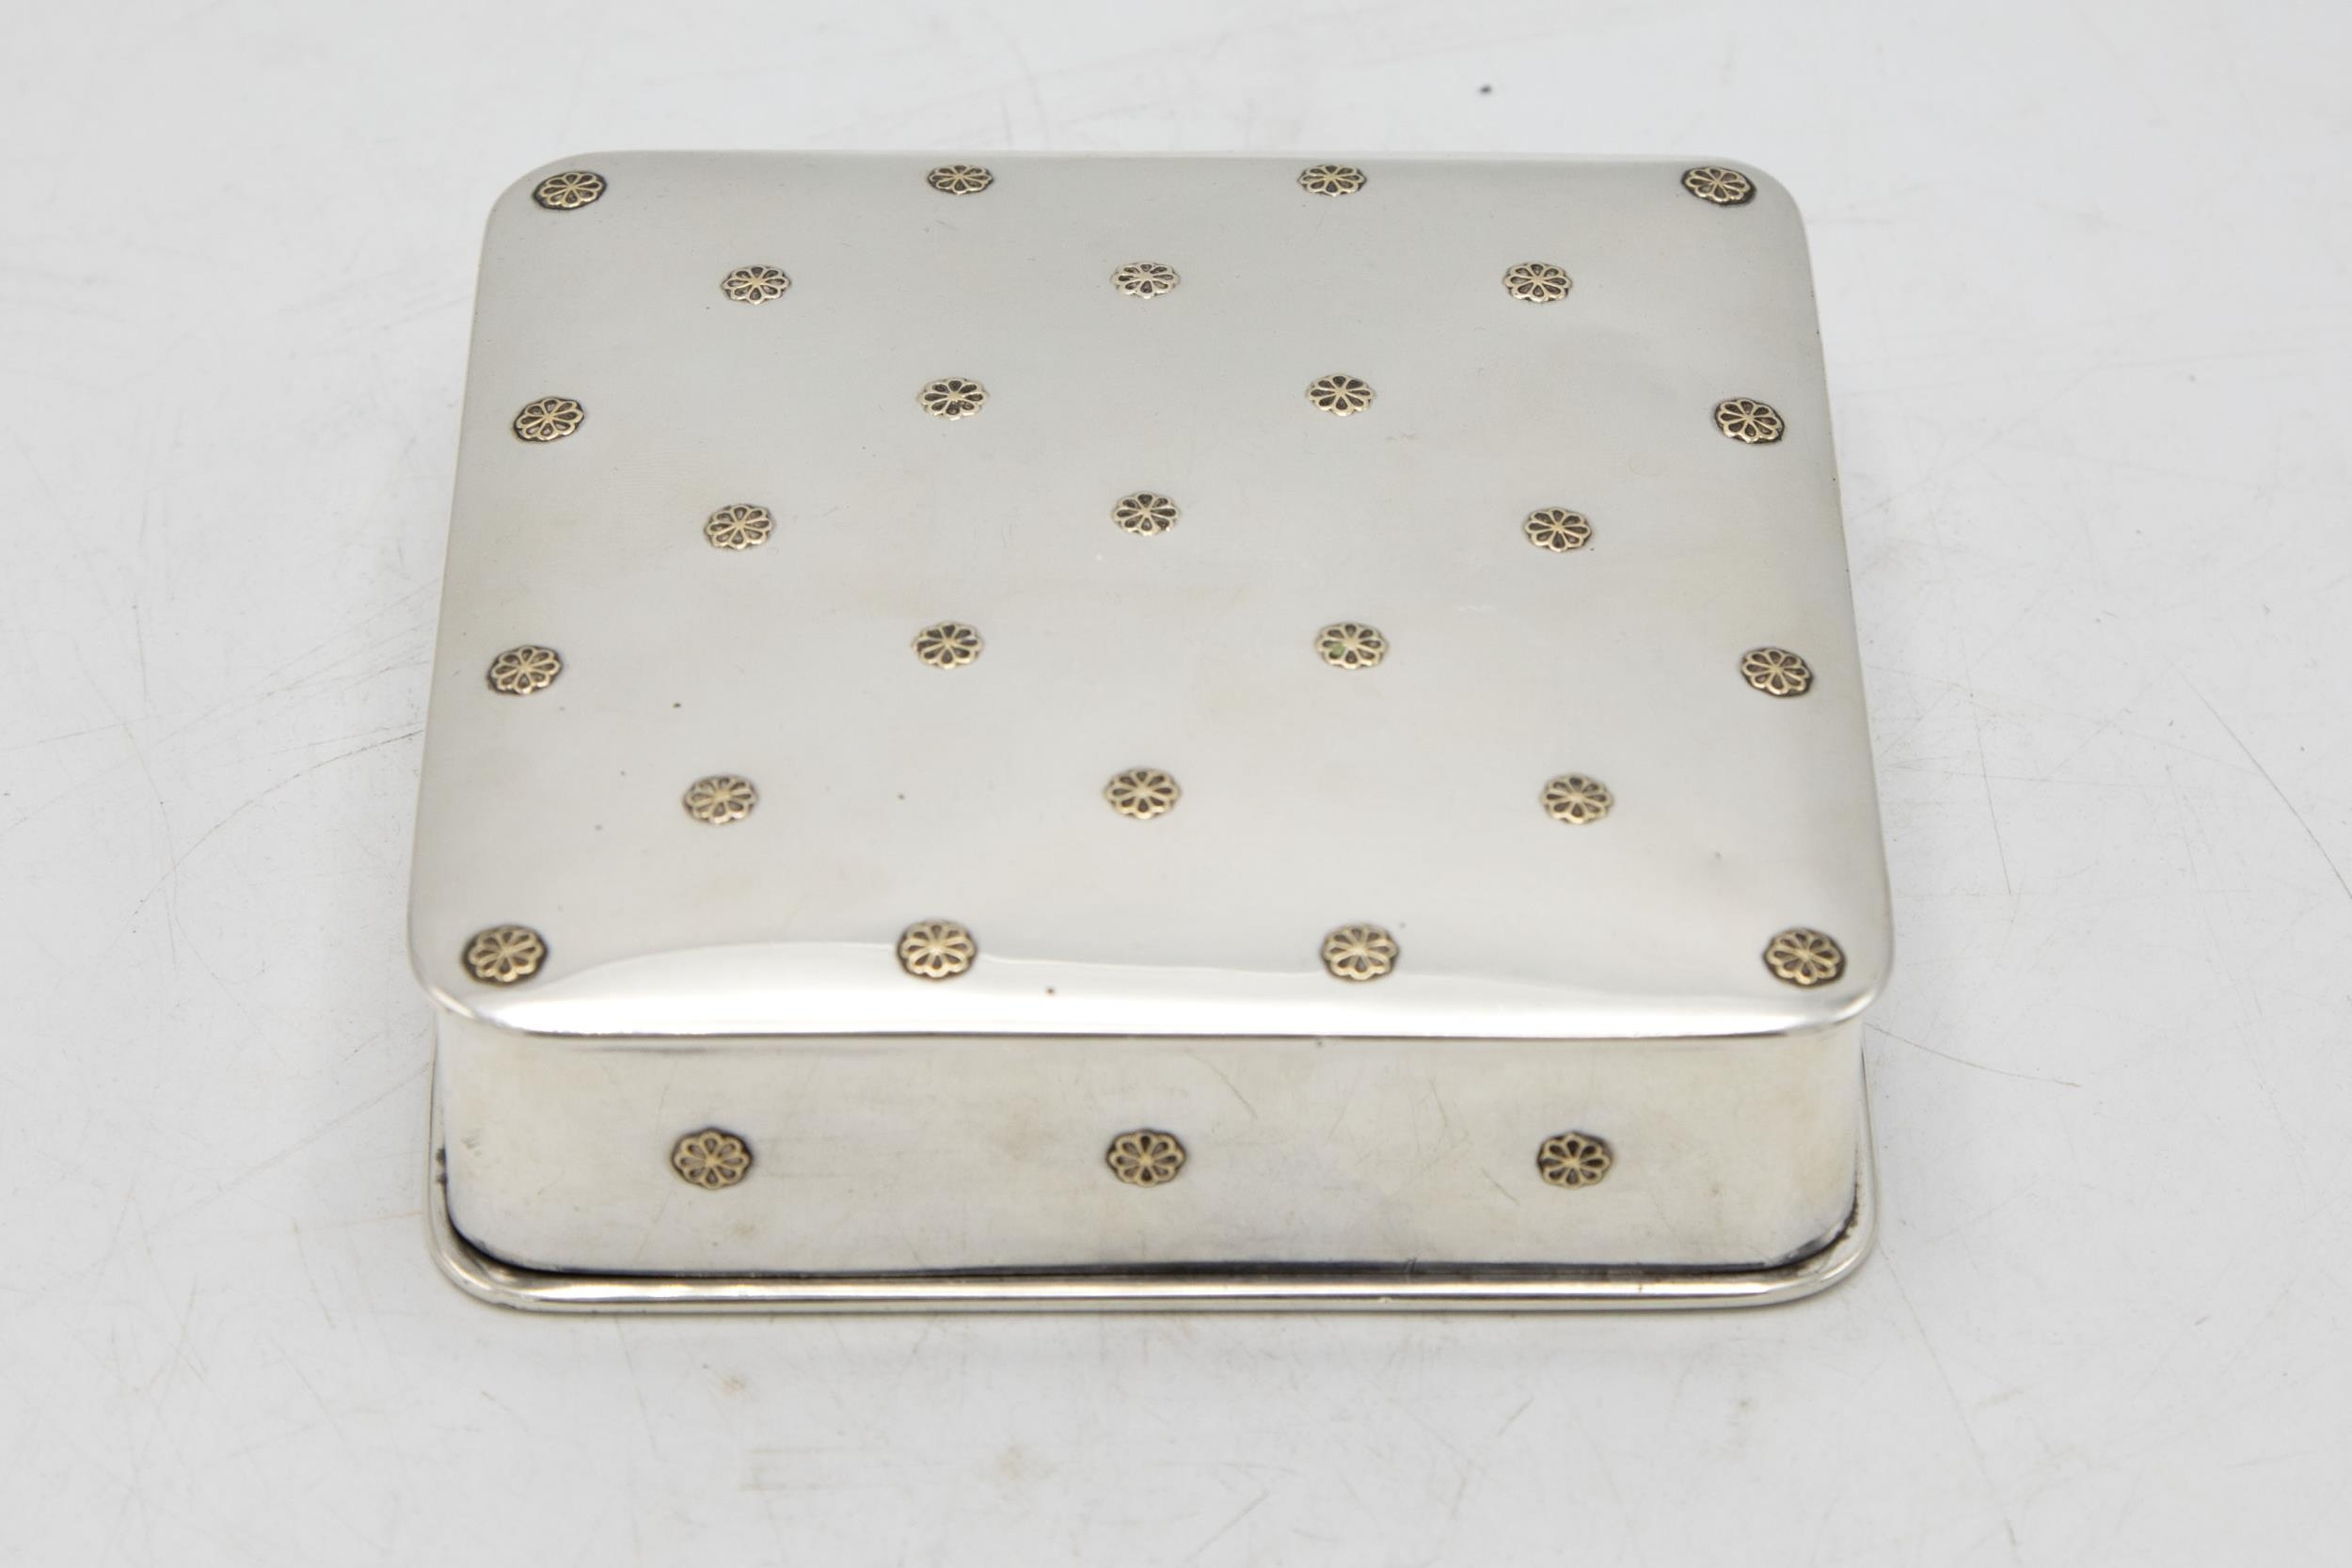 Exceptional quality Gustave Keller of Paris silver box, inspired by Japanese Royal Family, with